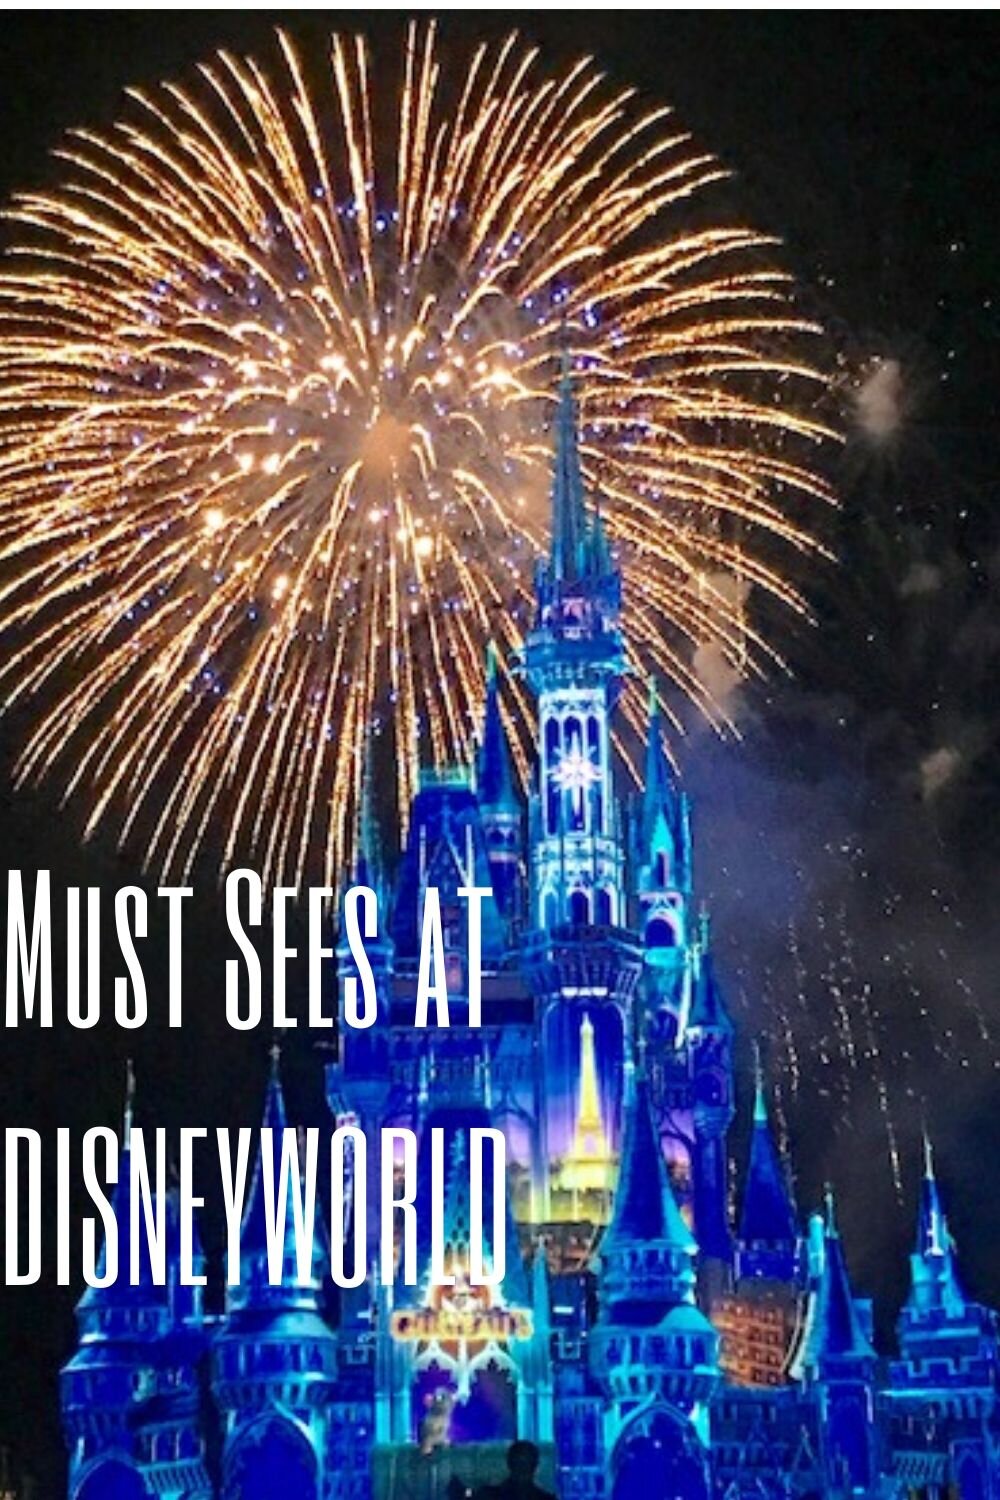 These are the best tips for a vacation to Disney World! Don't plan a Disney World family vacation without these tips and tricks. We will walk you through al you need to plan a successful first vacation at Disney World. All the best Disney World tips…